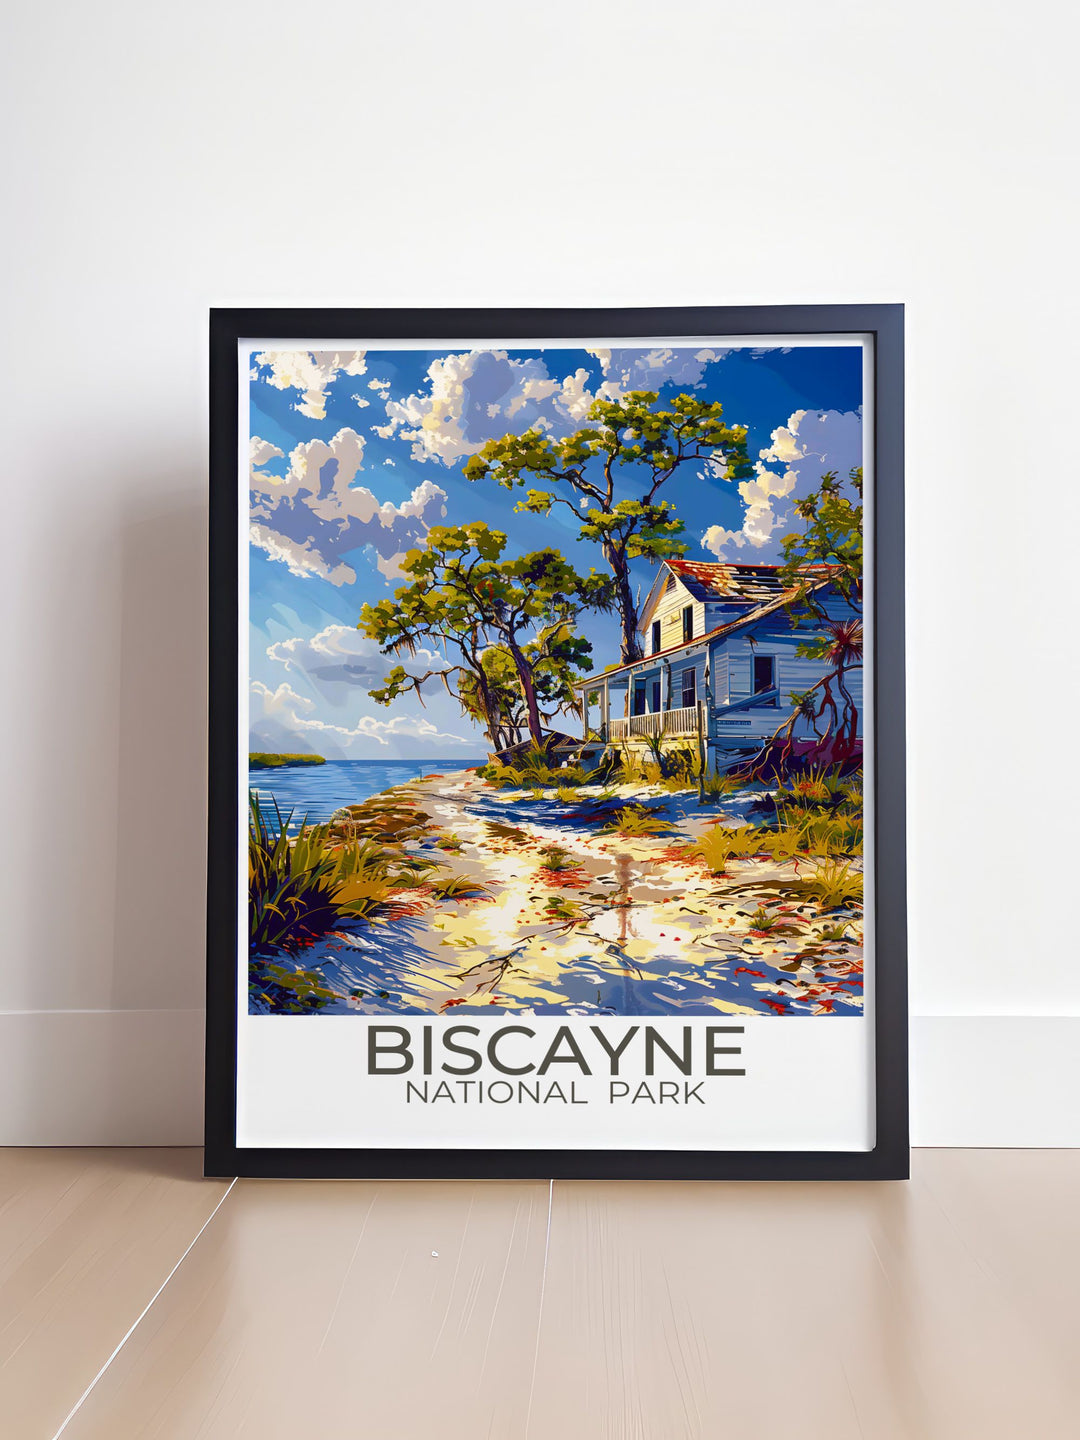 High quality print of The Maritime Heritage Trail and coral reefs in Biscayne National Park, capturing the stunning landscapes and marine life of this unique area. Ideal for art lovers who appreciate both history and nature.